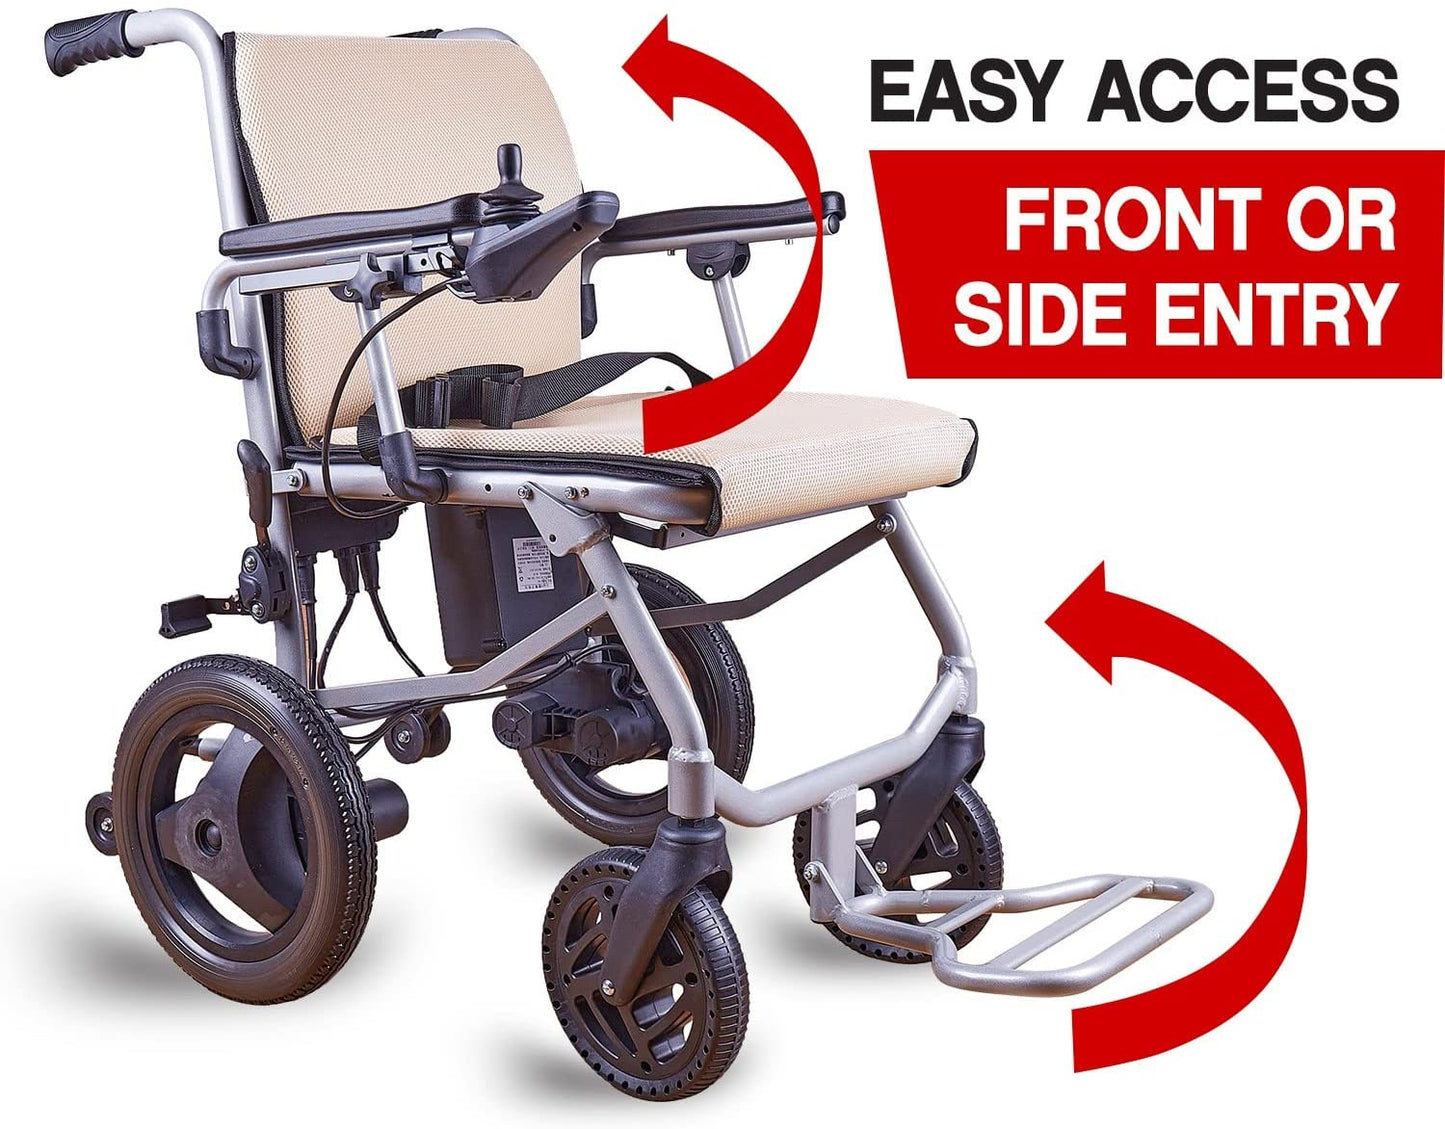 KANO (Green) -Foldable Electric Wheelchair, Travel Size, User-Friendly